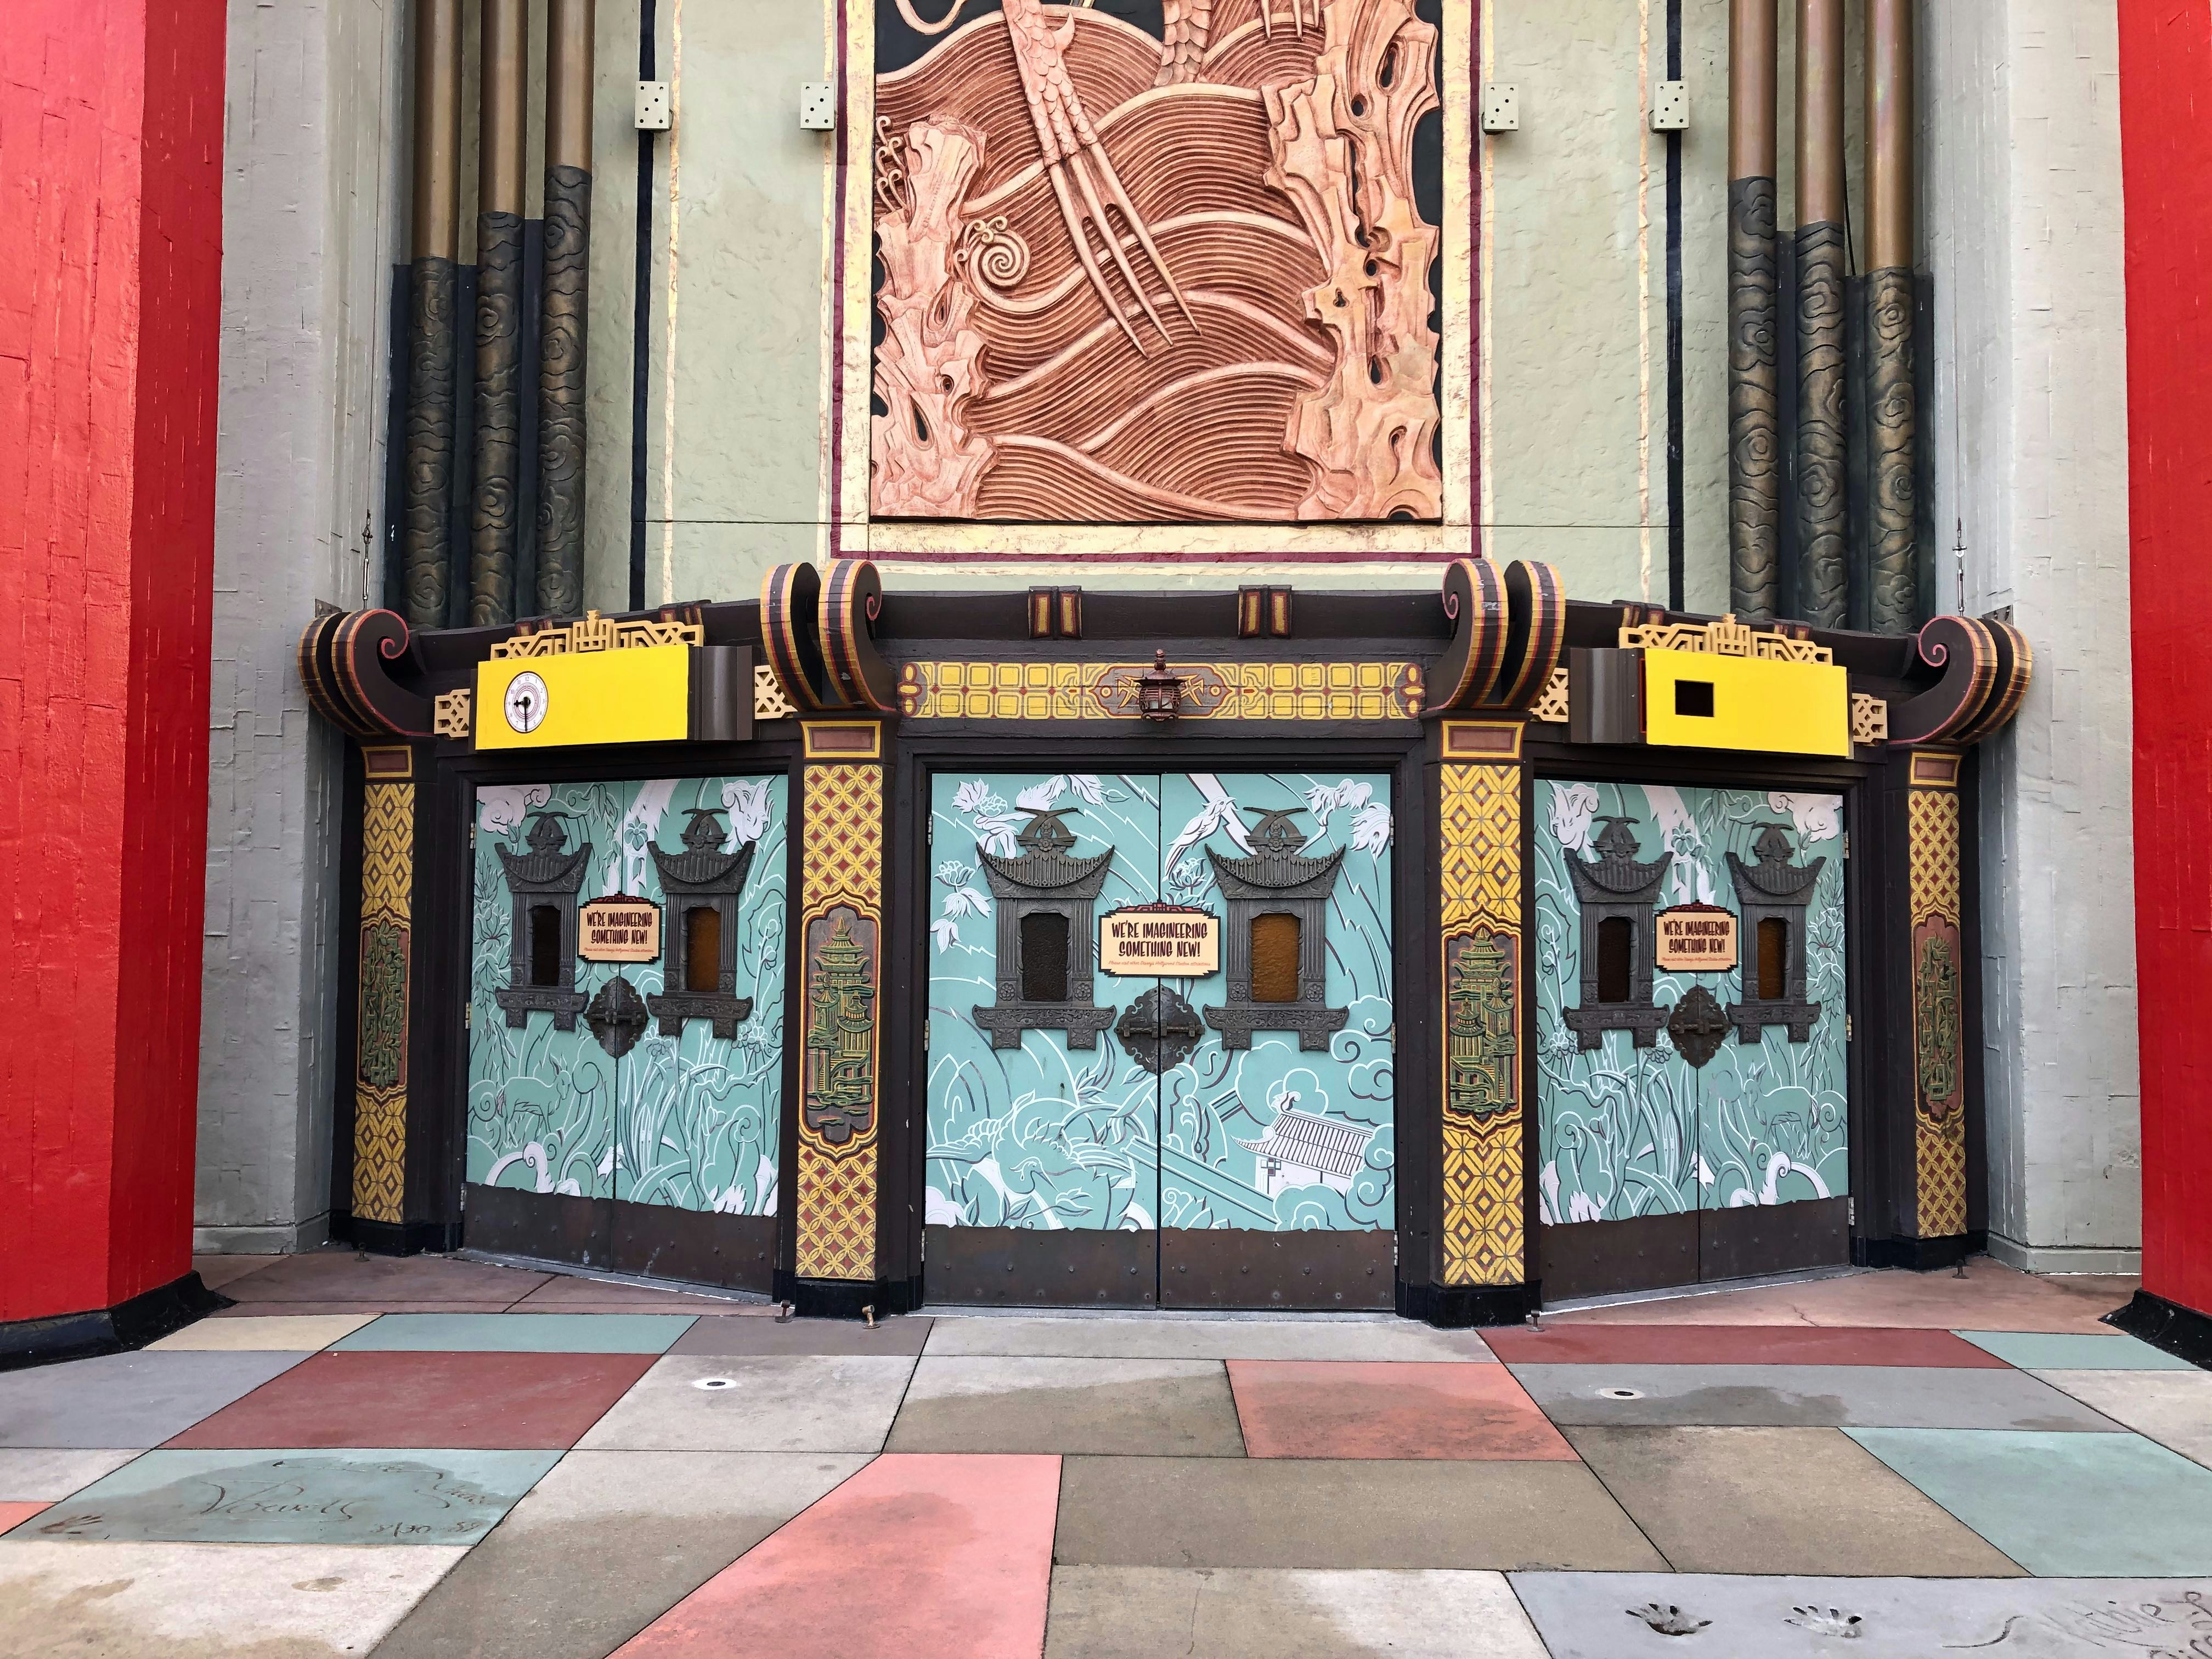 chinese theatre mickey and minnies runaway railway wait times and exit signs jan 2020 17.jpg?auto=compress%2Cformat&ixlib=php 1.2